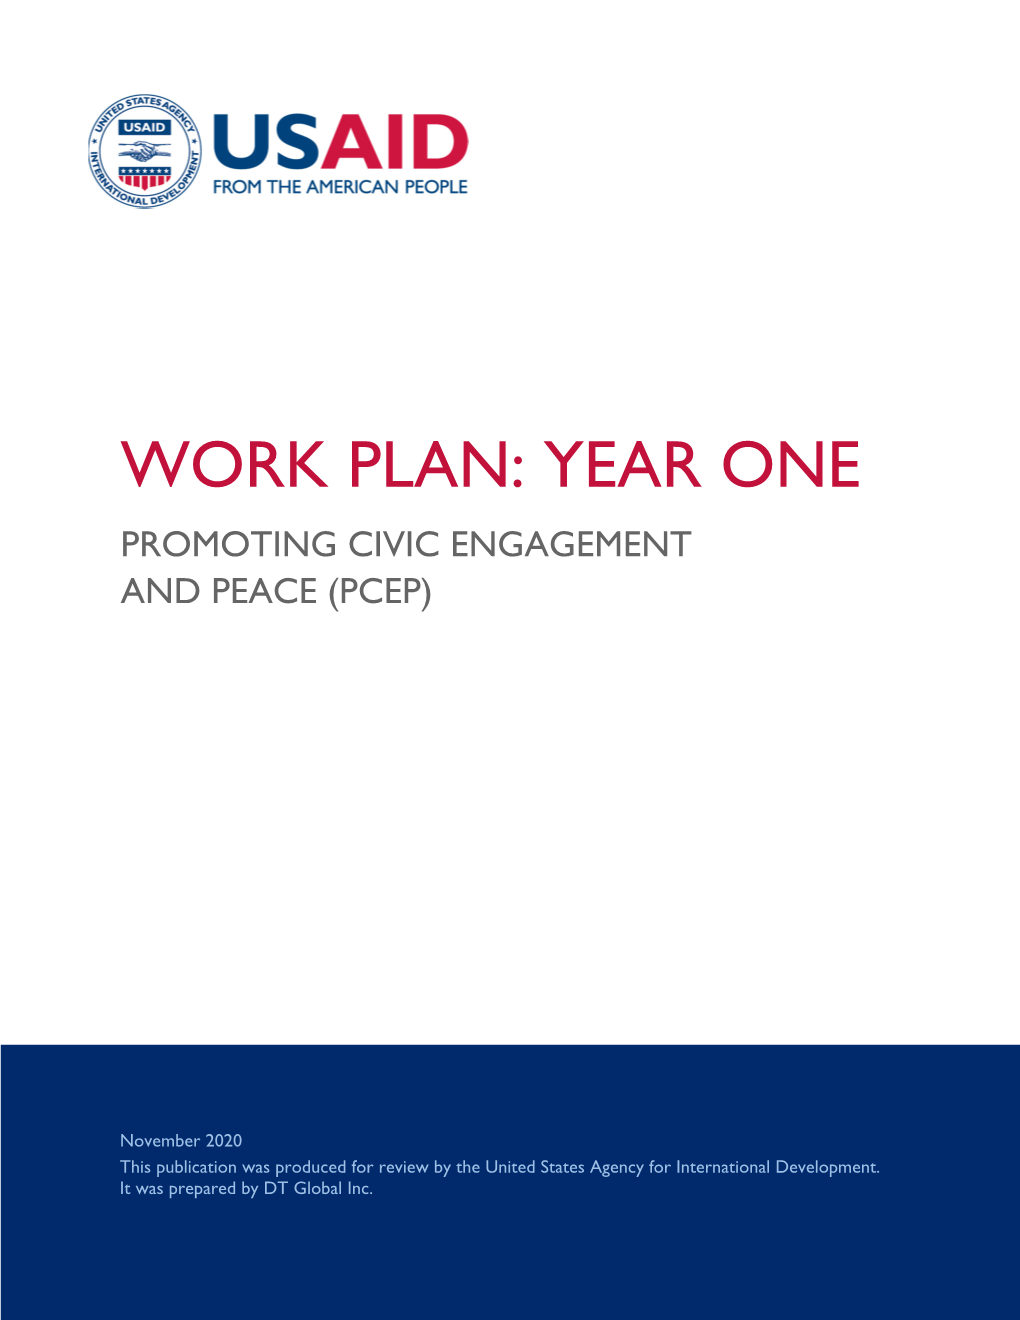 Work Plan: Year One Promoting Civic Engagement and Peace (Pcep)